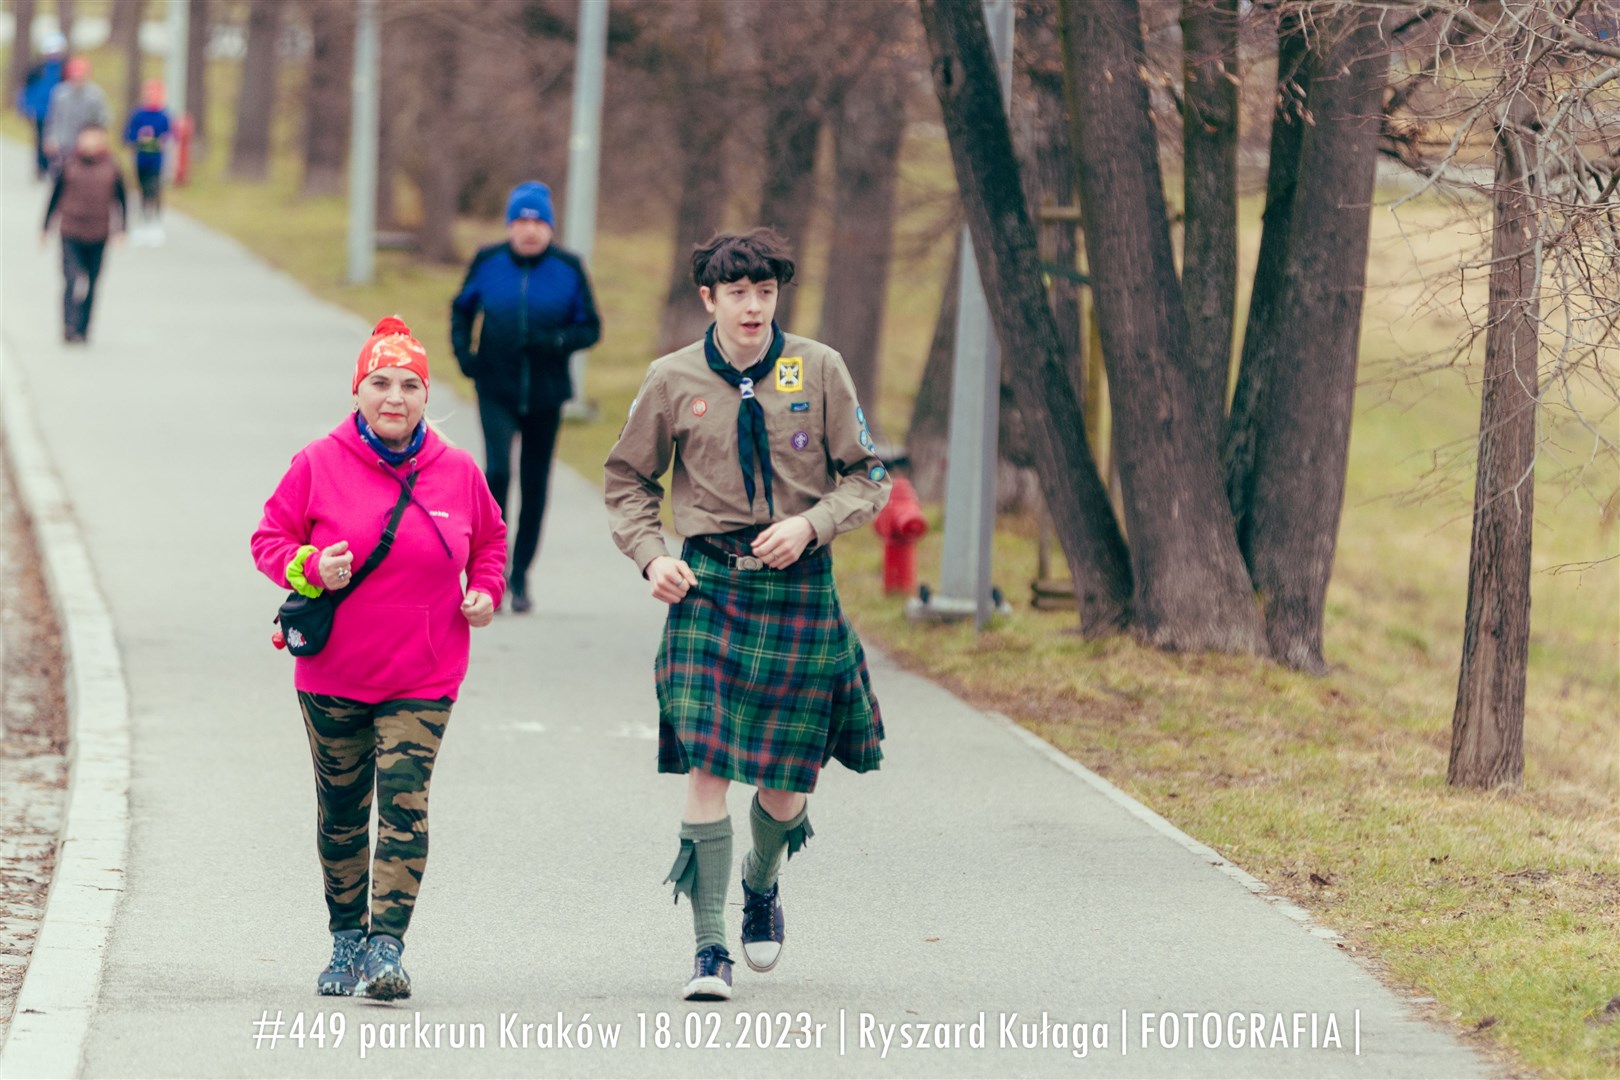 Members of the Invergordon unit made their mark during a parkrun in Krakow. Picture: Ryszard Kuluga